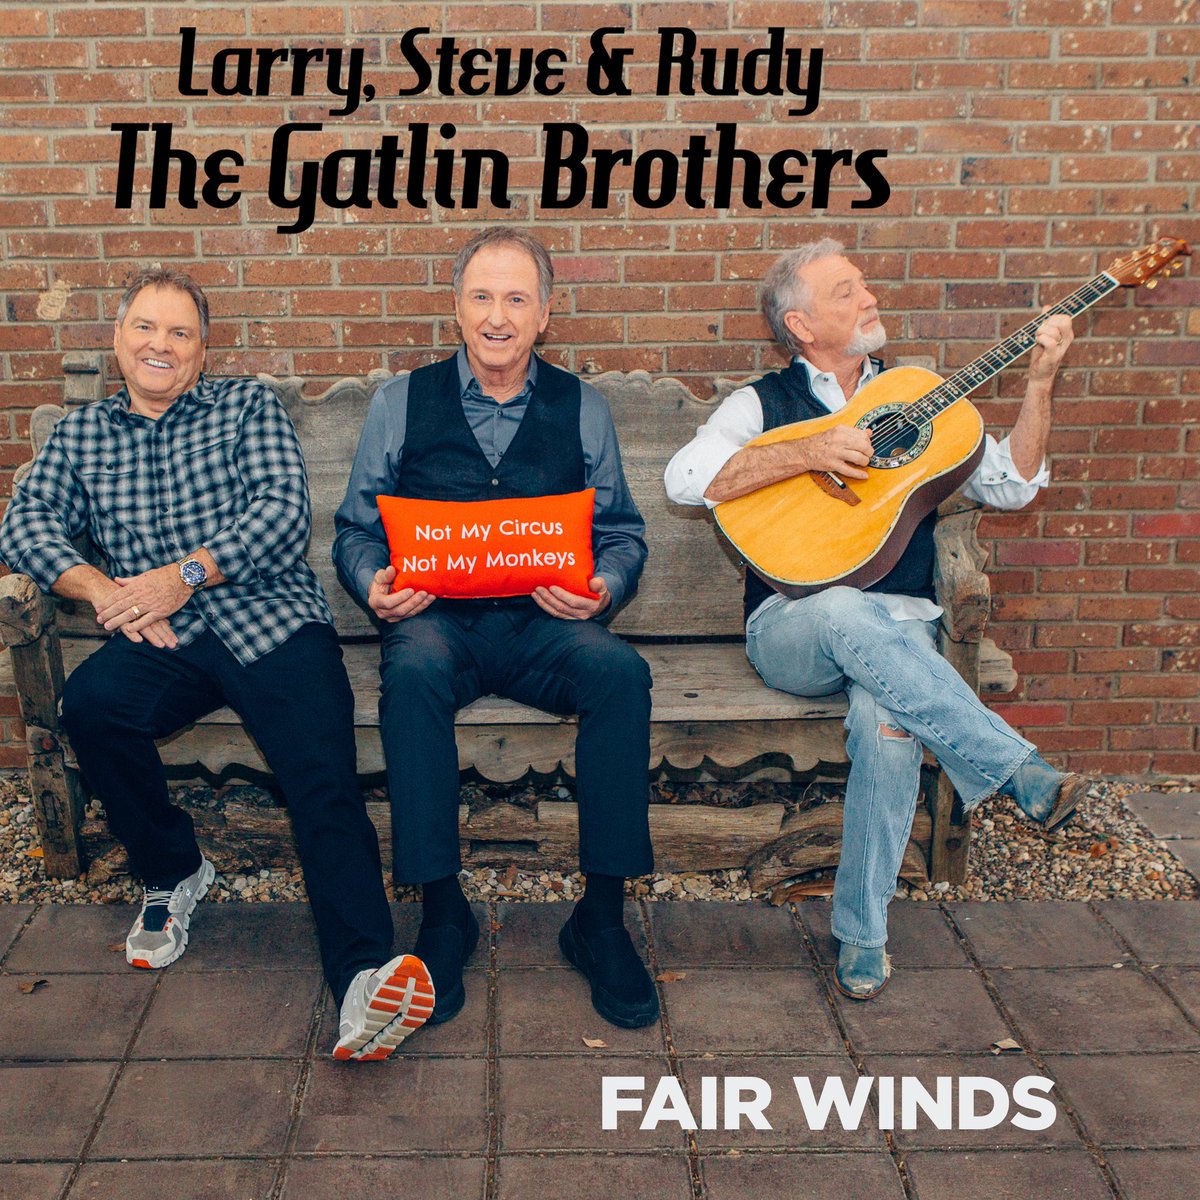 “Fair Winds” is out and Streaming everywhere. Click the link below and tap “Fair Winds” to listen to it! • linktr.ee/gatlinbrothers… • #NewMusicFriday #CountryMusic #LarryGatlin #Thegatlinbrothers #fairwinds #newmusicalert